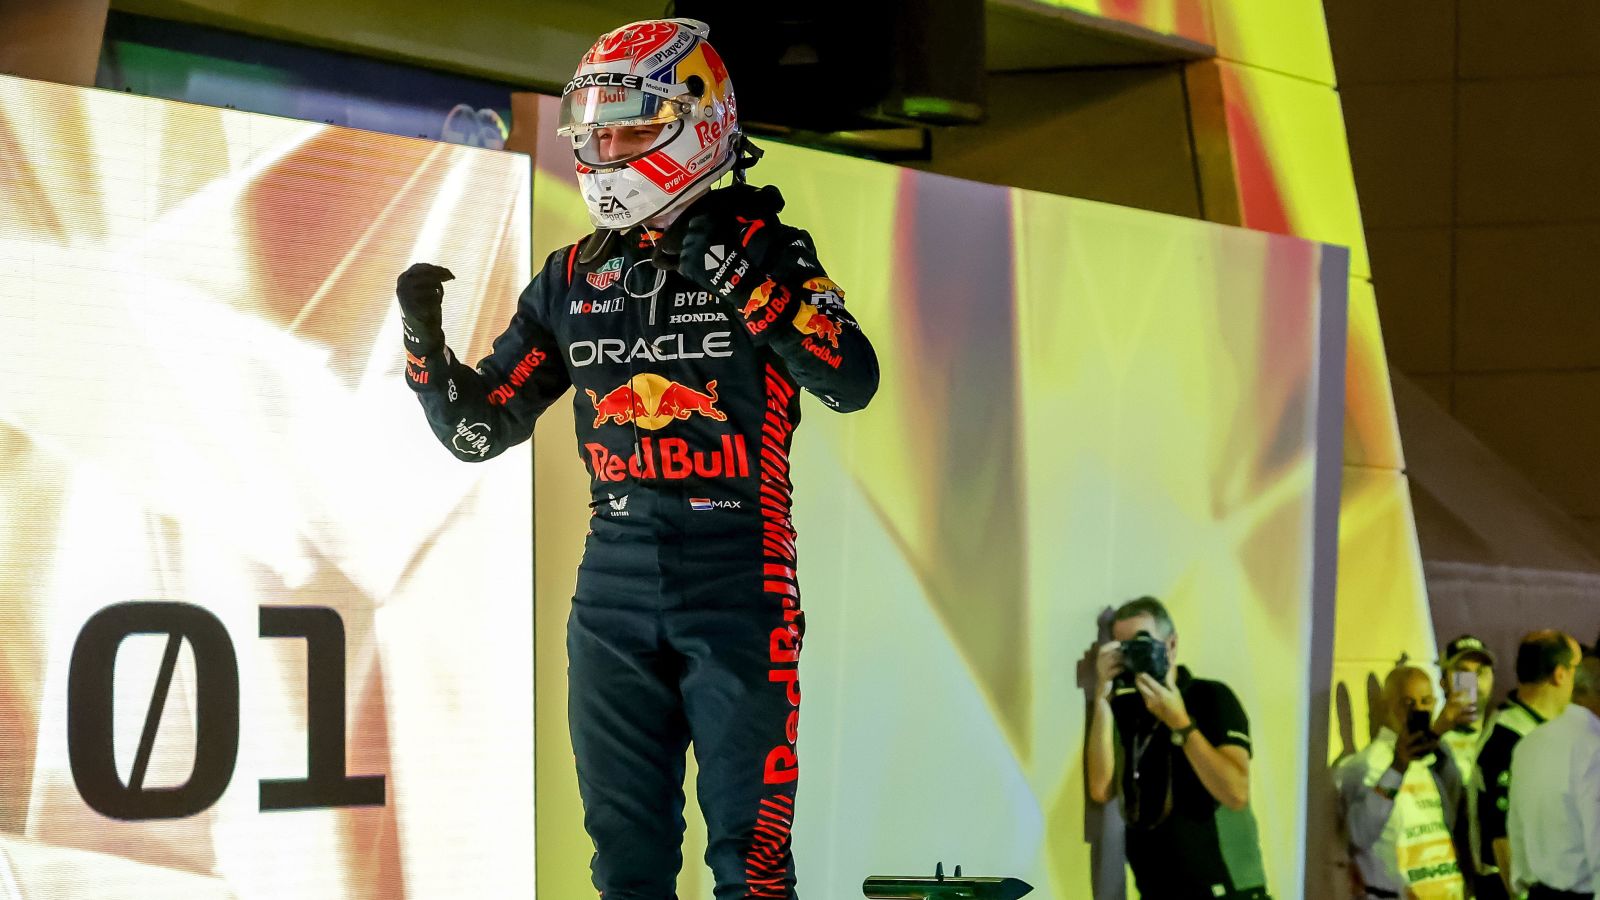 Two time F1 champ Max Verstappen once forced to walk miles by father Jos Verstappen in racing gear